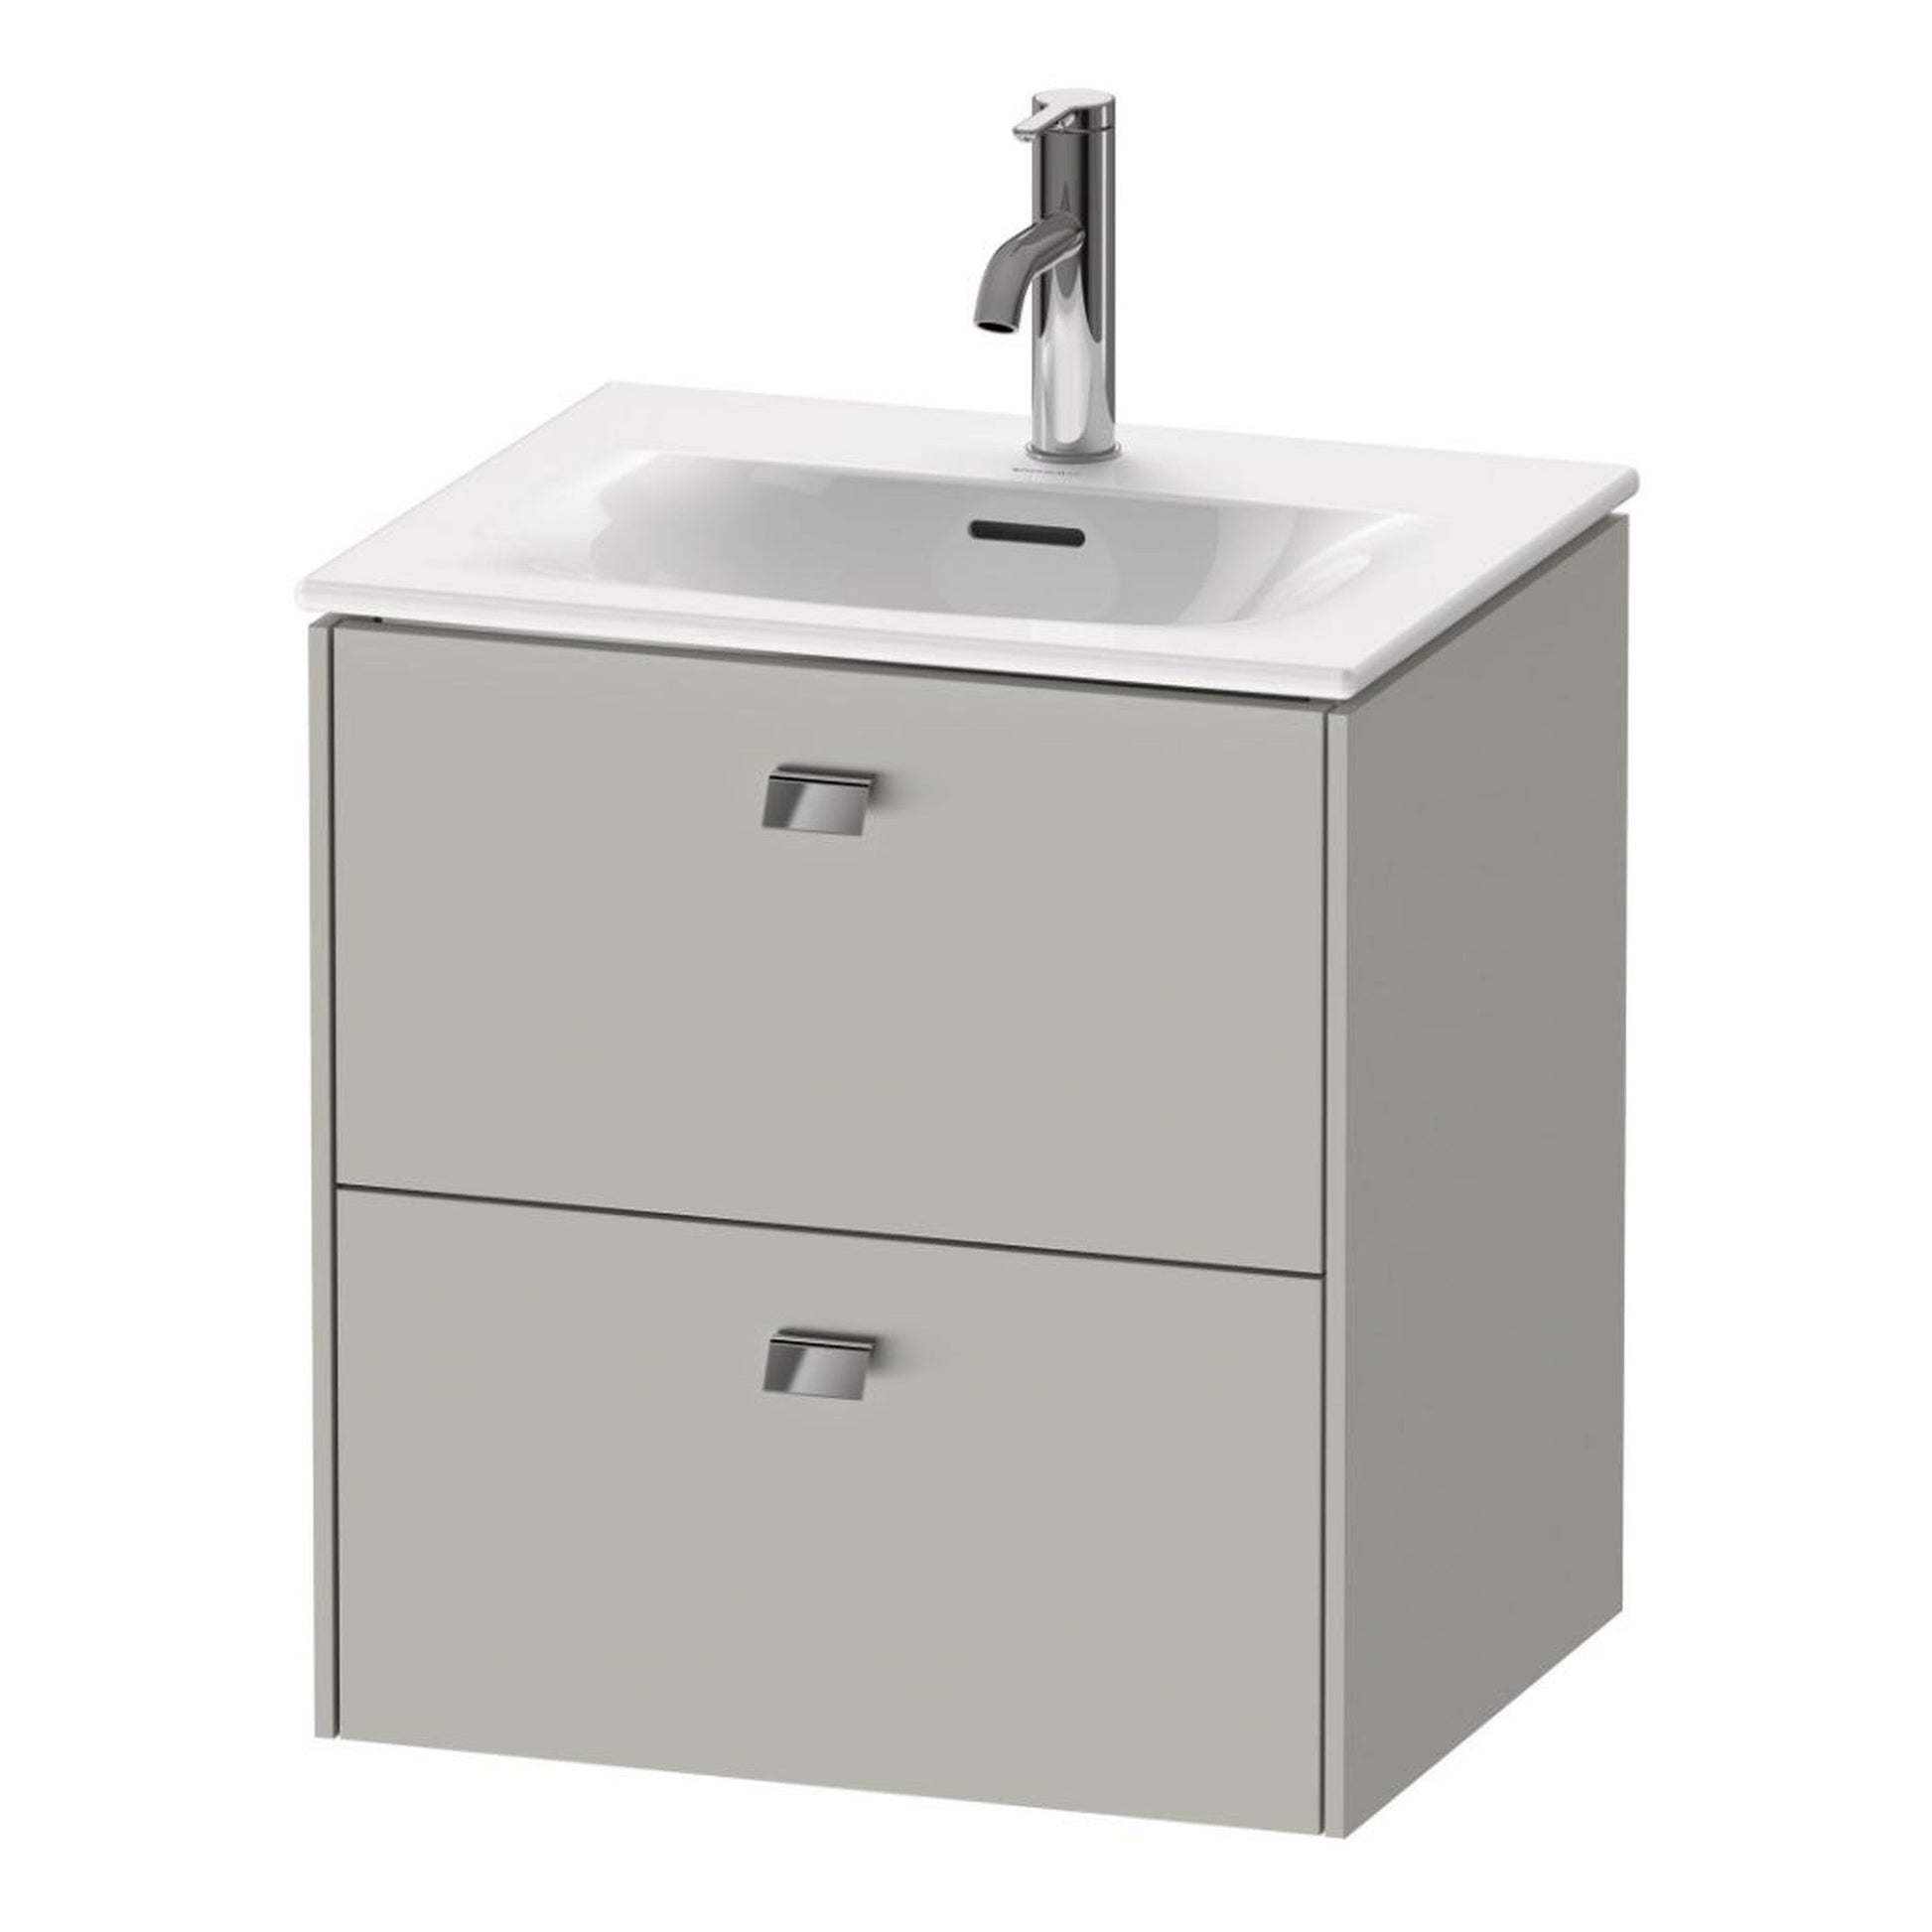 Duravit Brioso BR43090 20" x 22" x 16" Two Drawer Wall-Mount Vanity Unit in Concrete Grey Matt and Chrome Handle